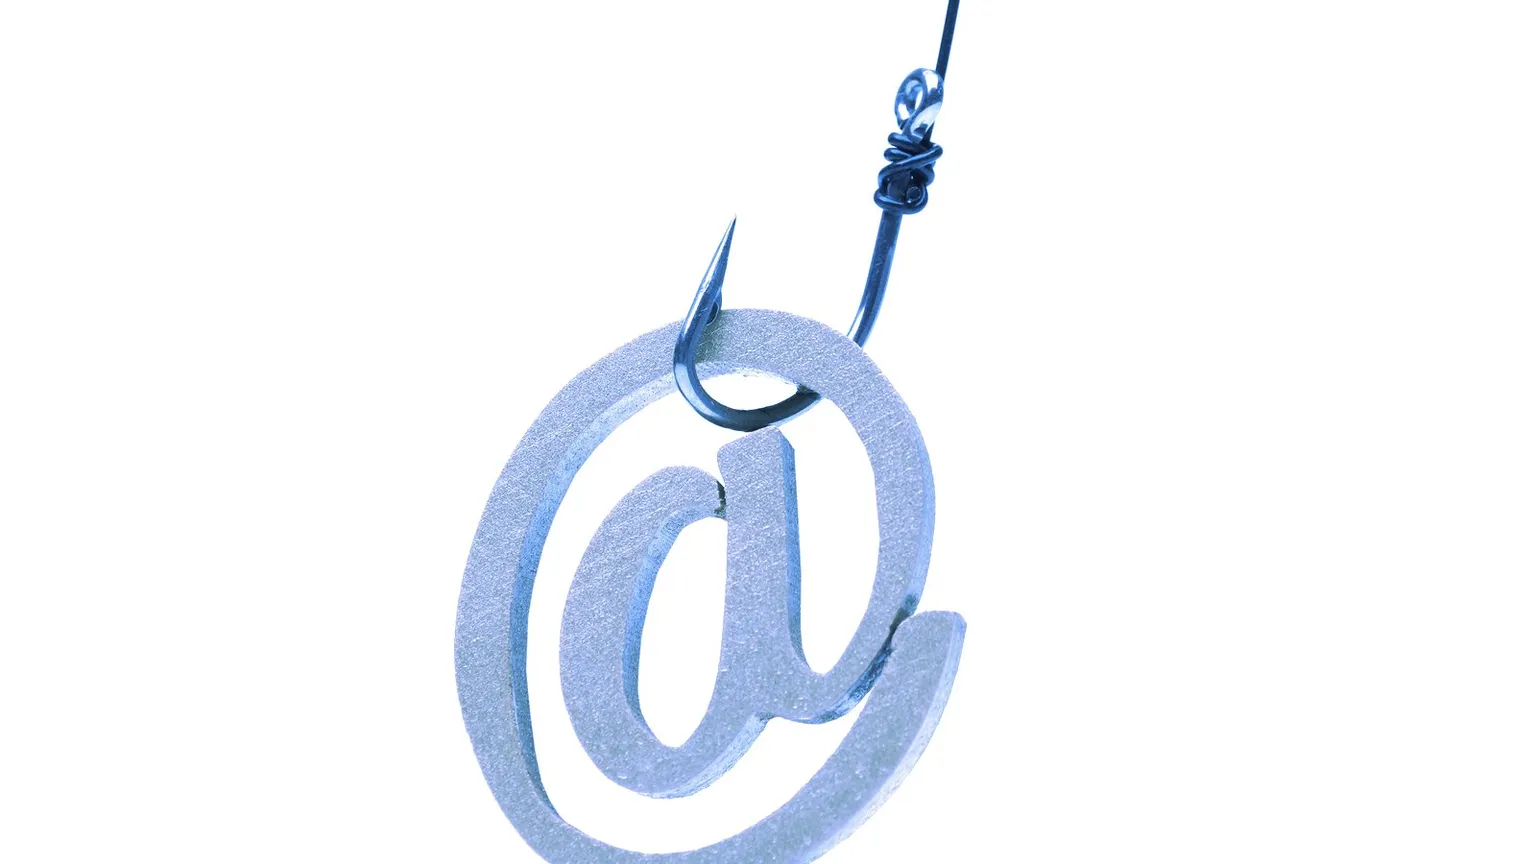 A fish hook with email sign. Image: Shutterstock